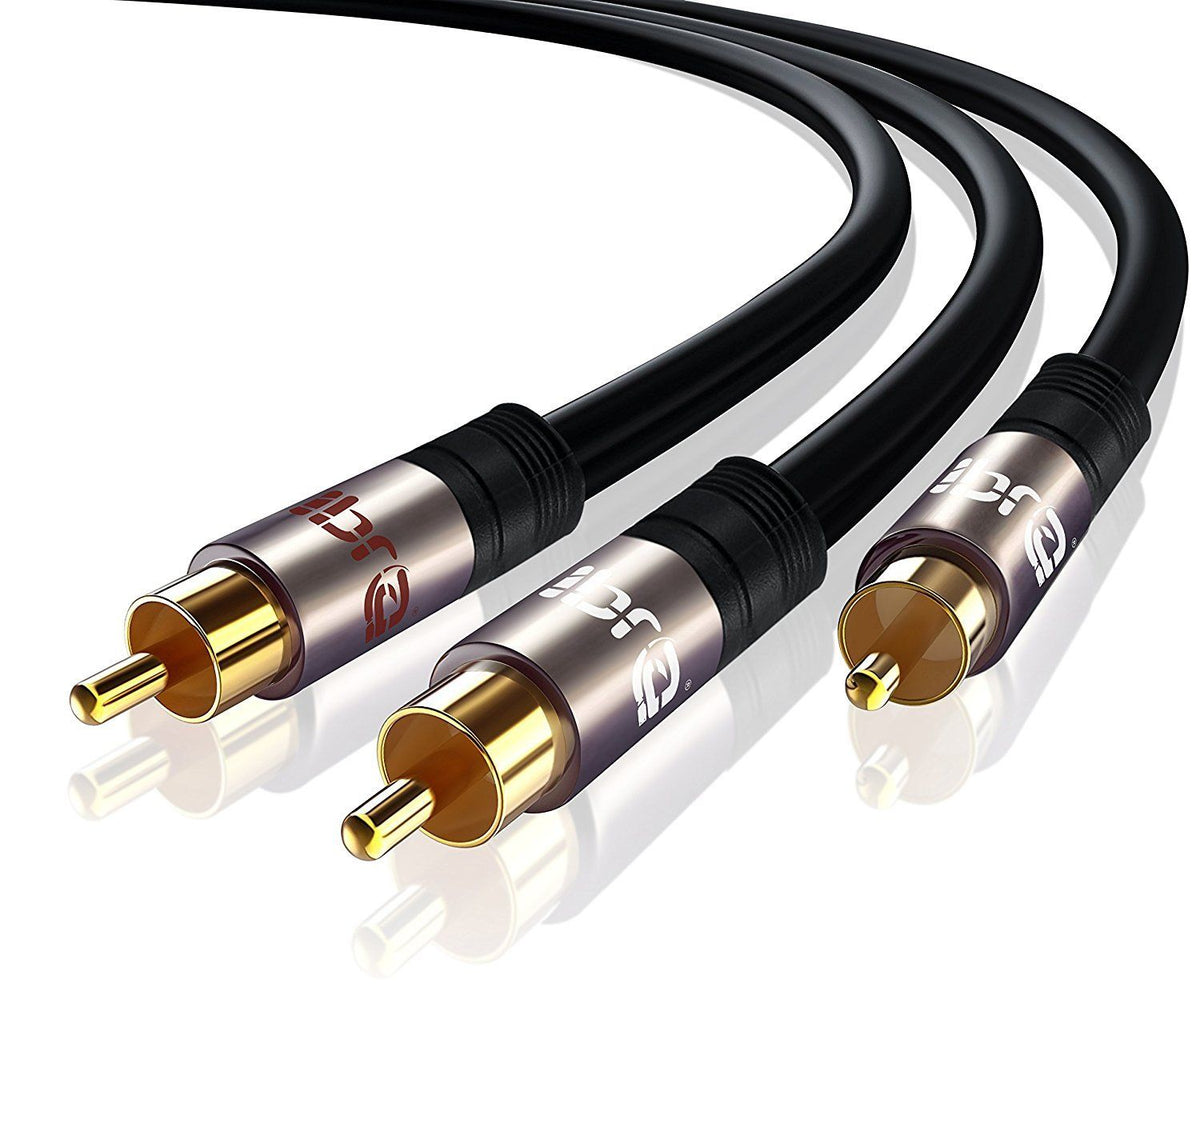 IBRA 10M Y Cable / Subwoofer Cable / Audio Cable / RCA Cable (1 x RCA to 2 x RCA) - GUN Metal Range